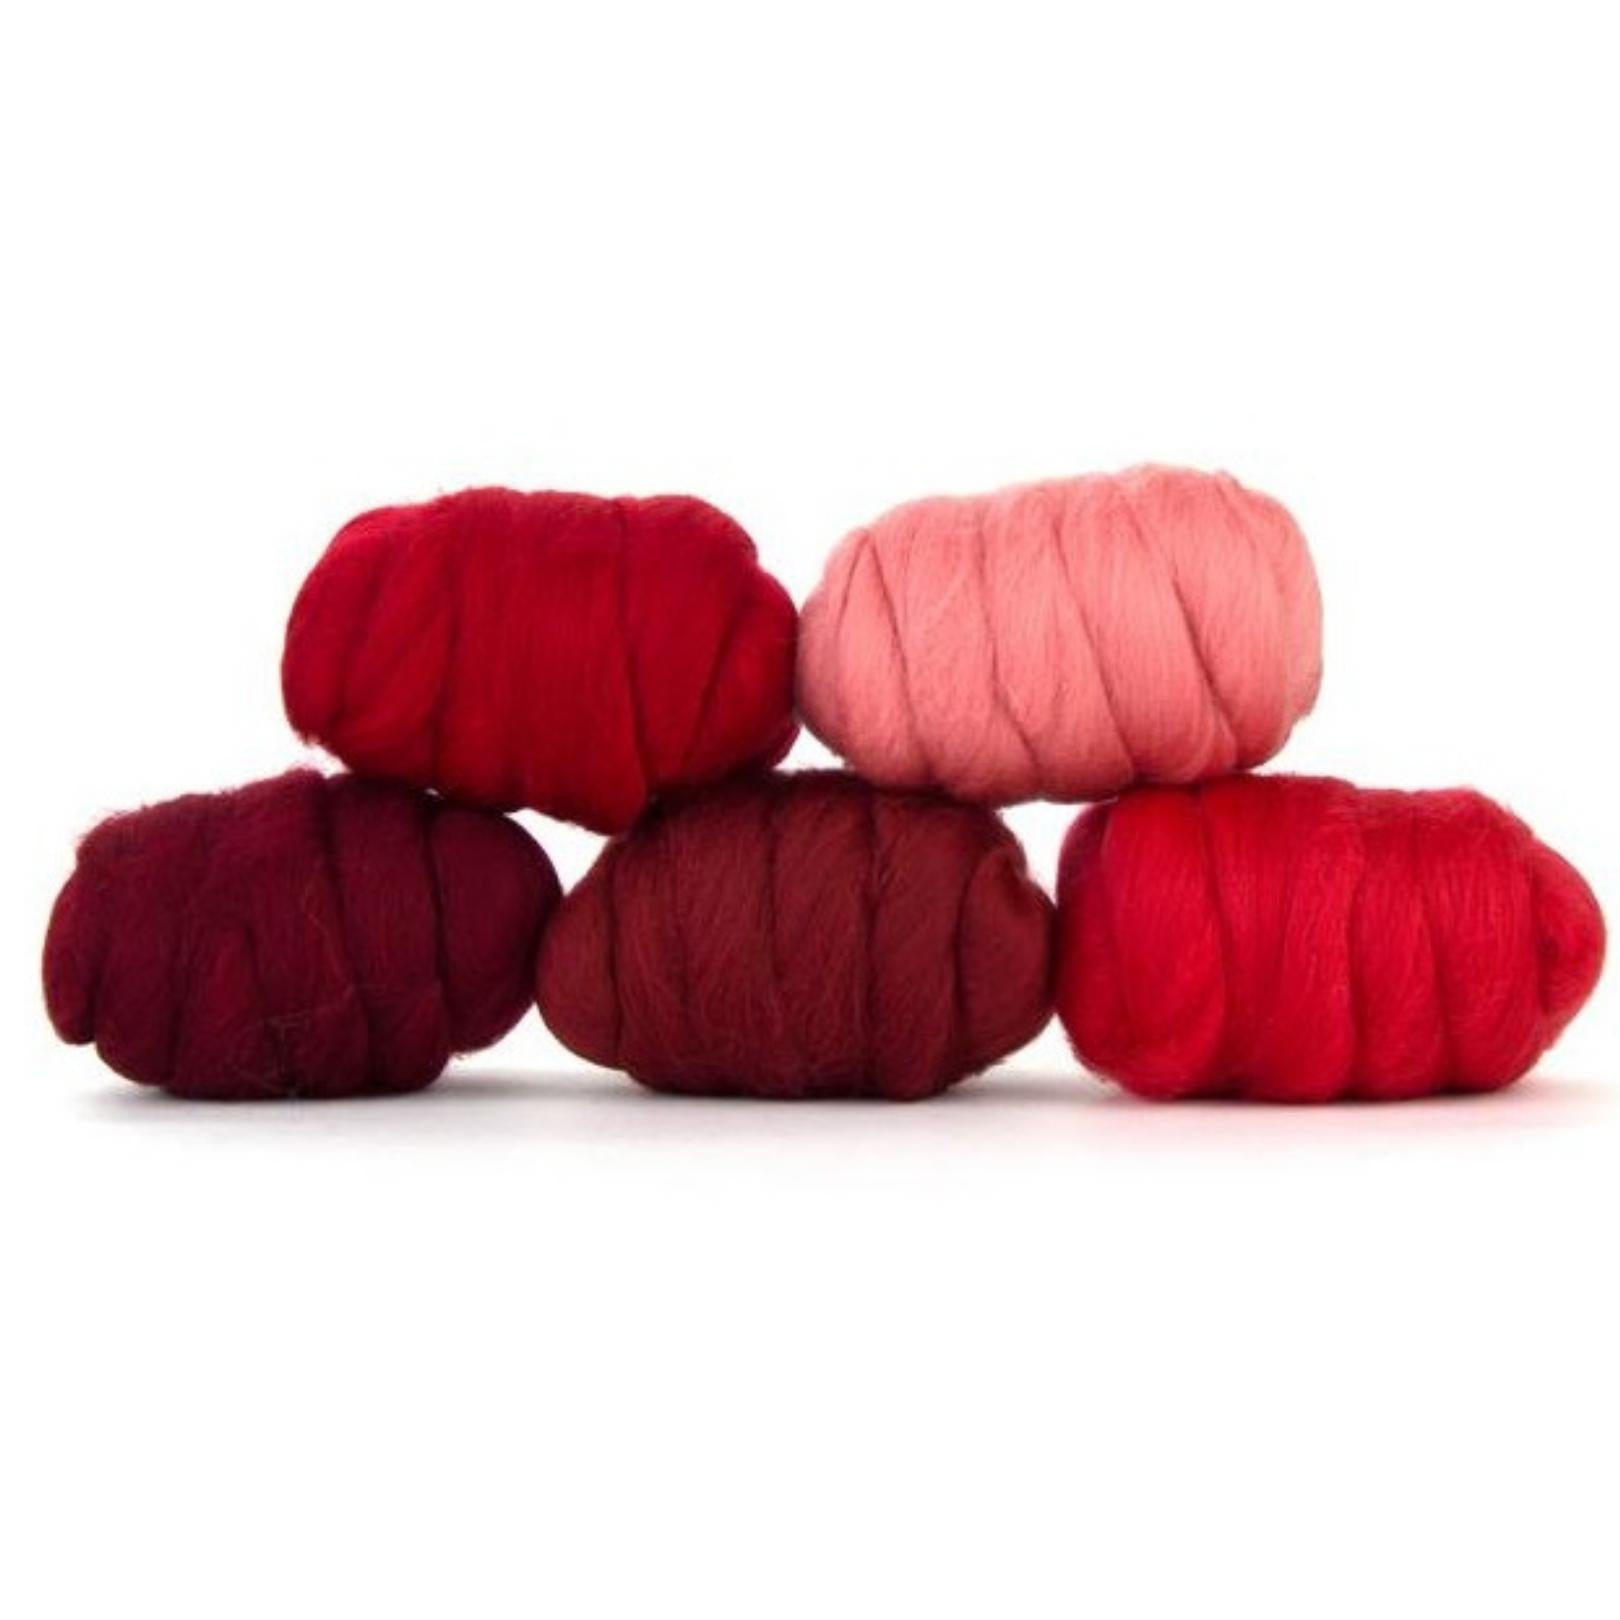 Mixed Merino Wool Variety Pack | Wondrous Reds (Reds) 250 Grams, 23 Micron - Textile Indie 